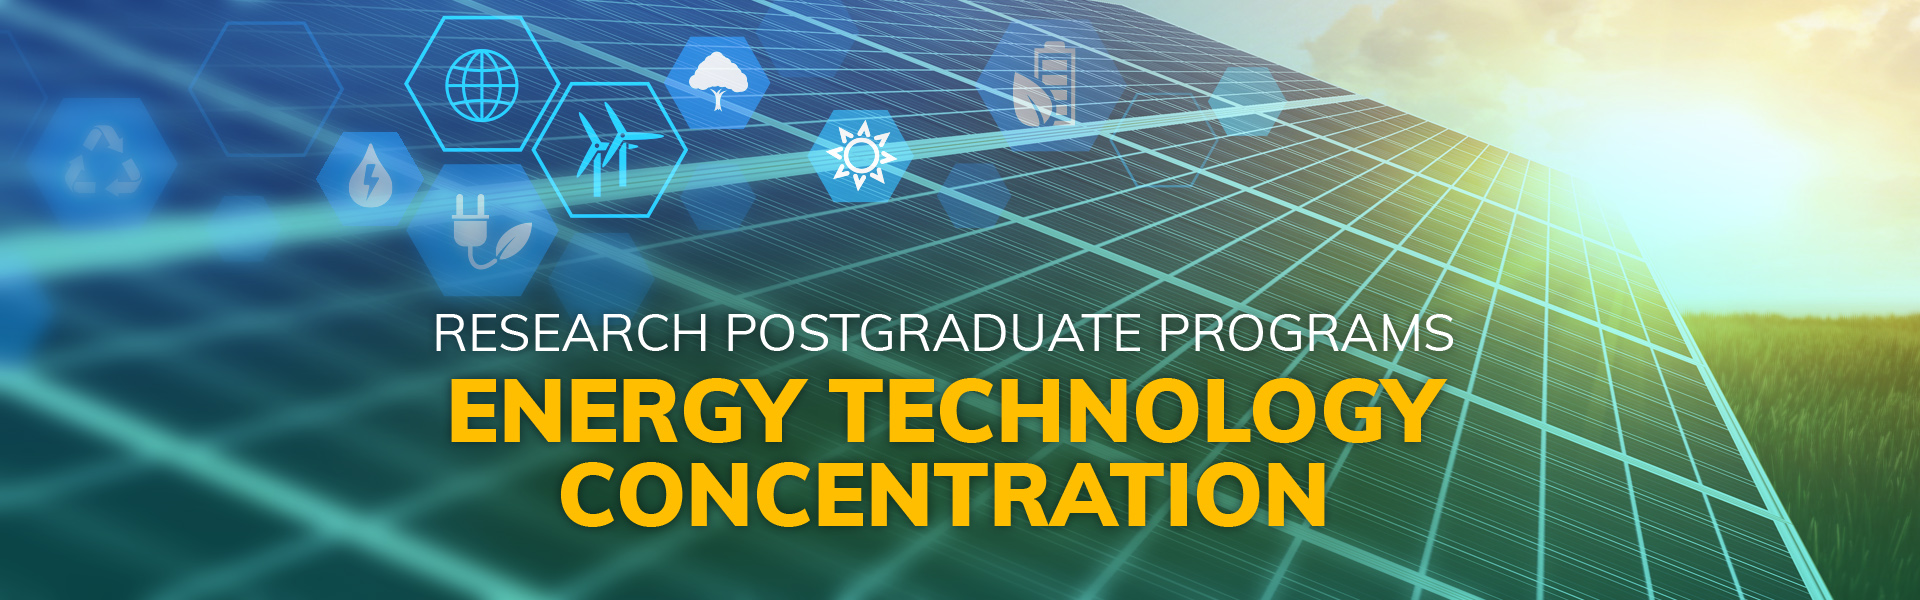 Energy Technology Concentration